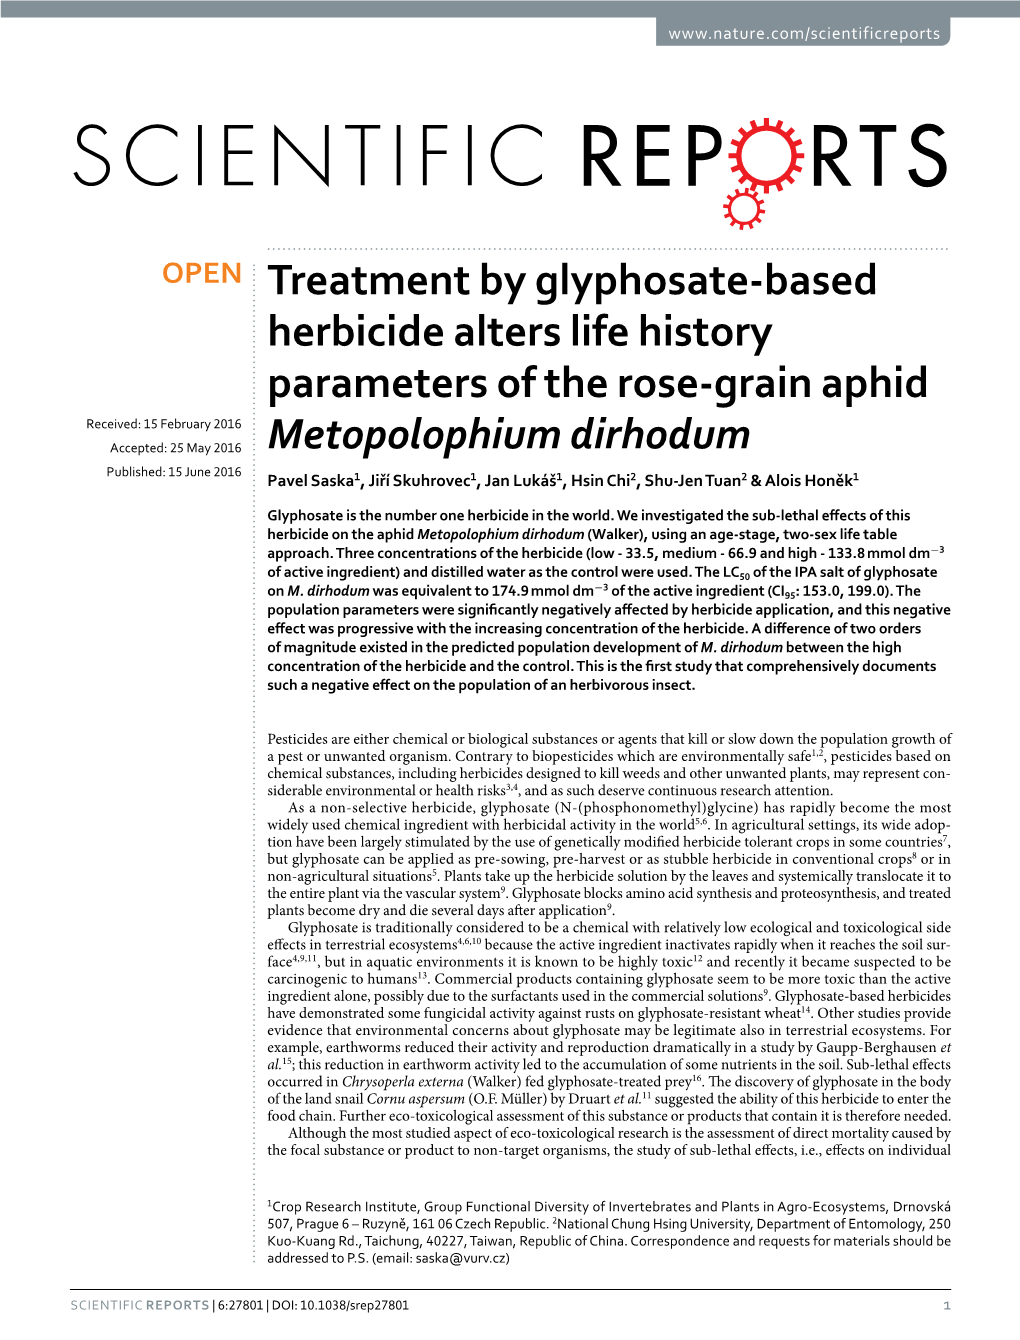 Treatment by Glyphosate-Based Herbicide Alters Life History